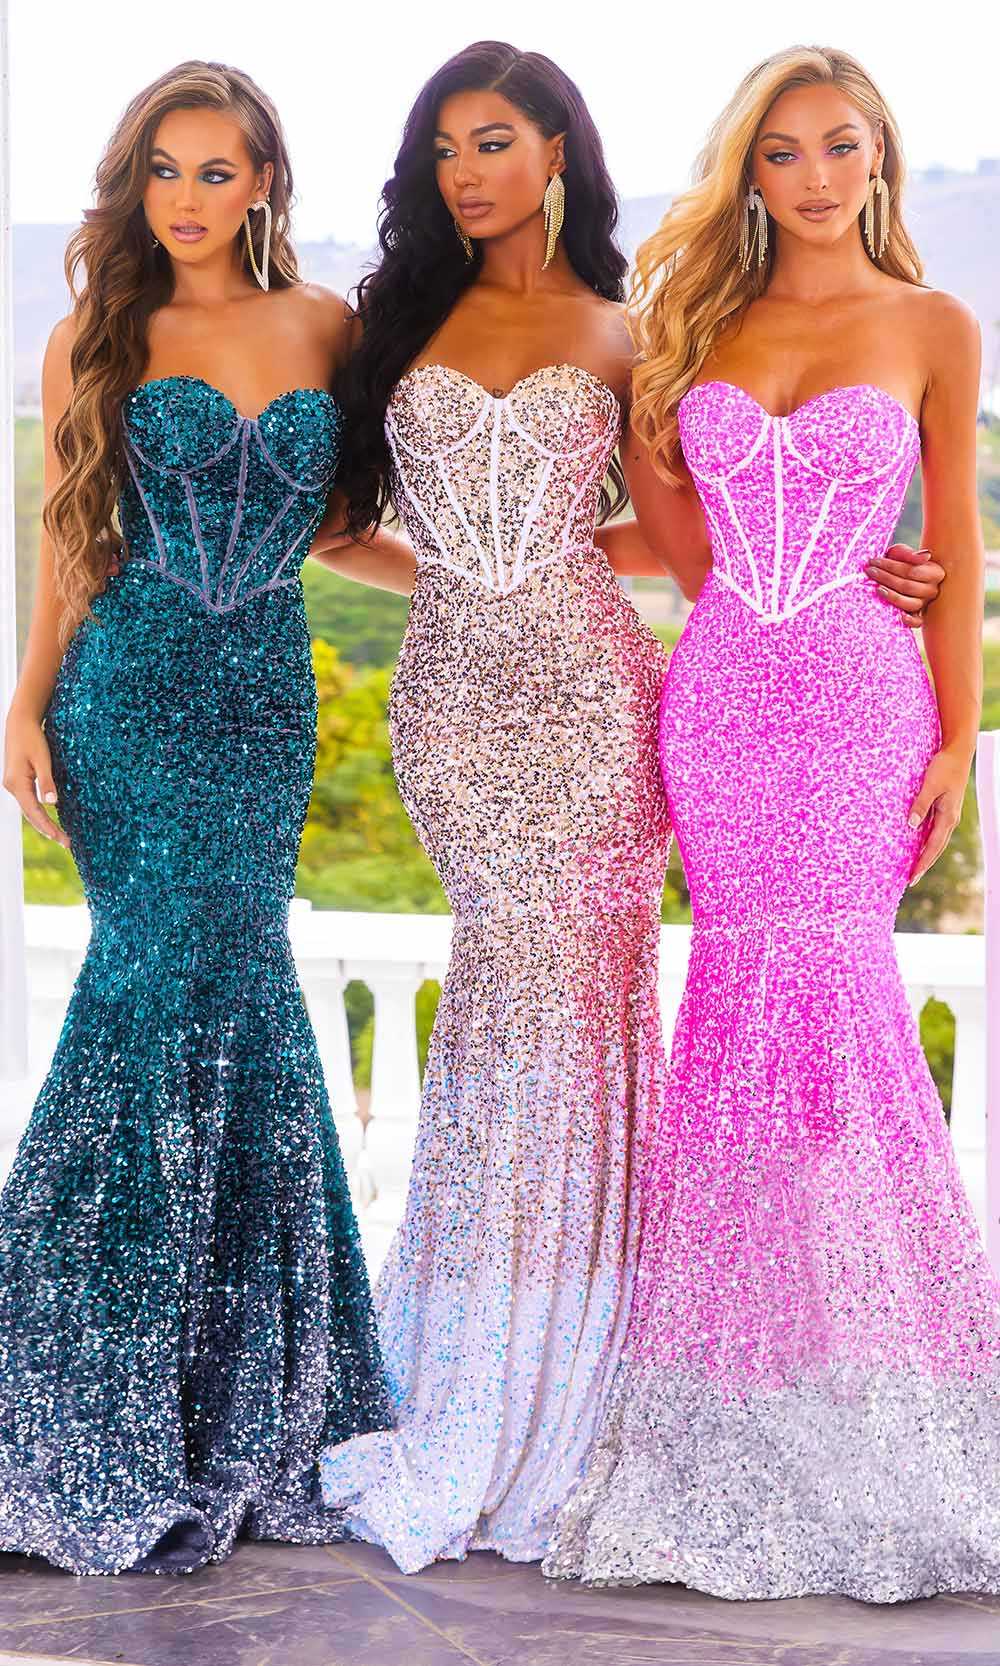 Portia and Scarlett, Portia and Scarlett - Ps22346 Strapless Ombre Sequin Gown